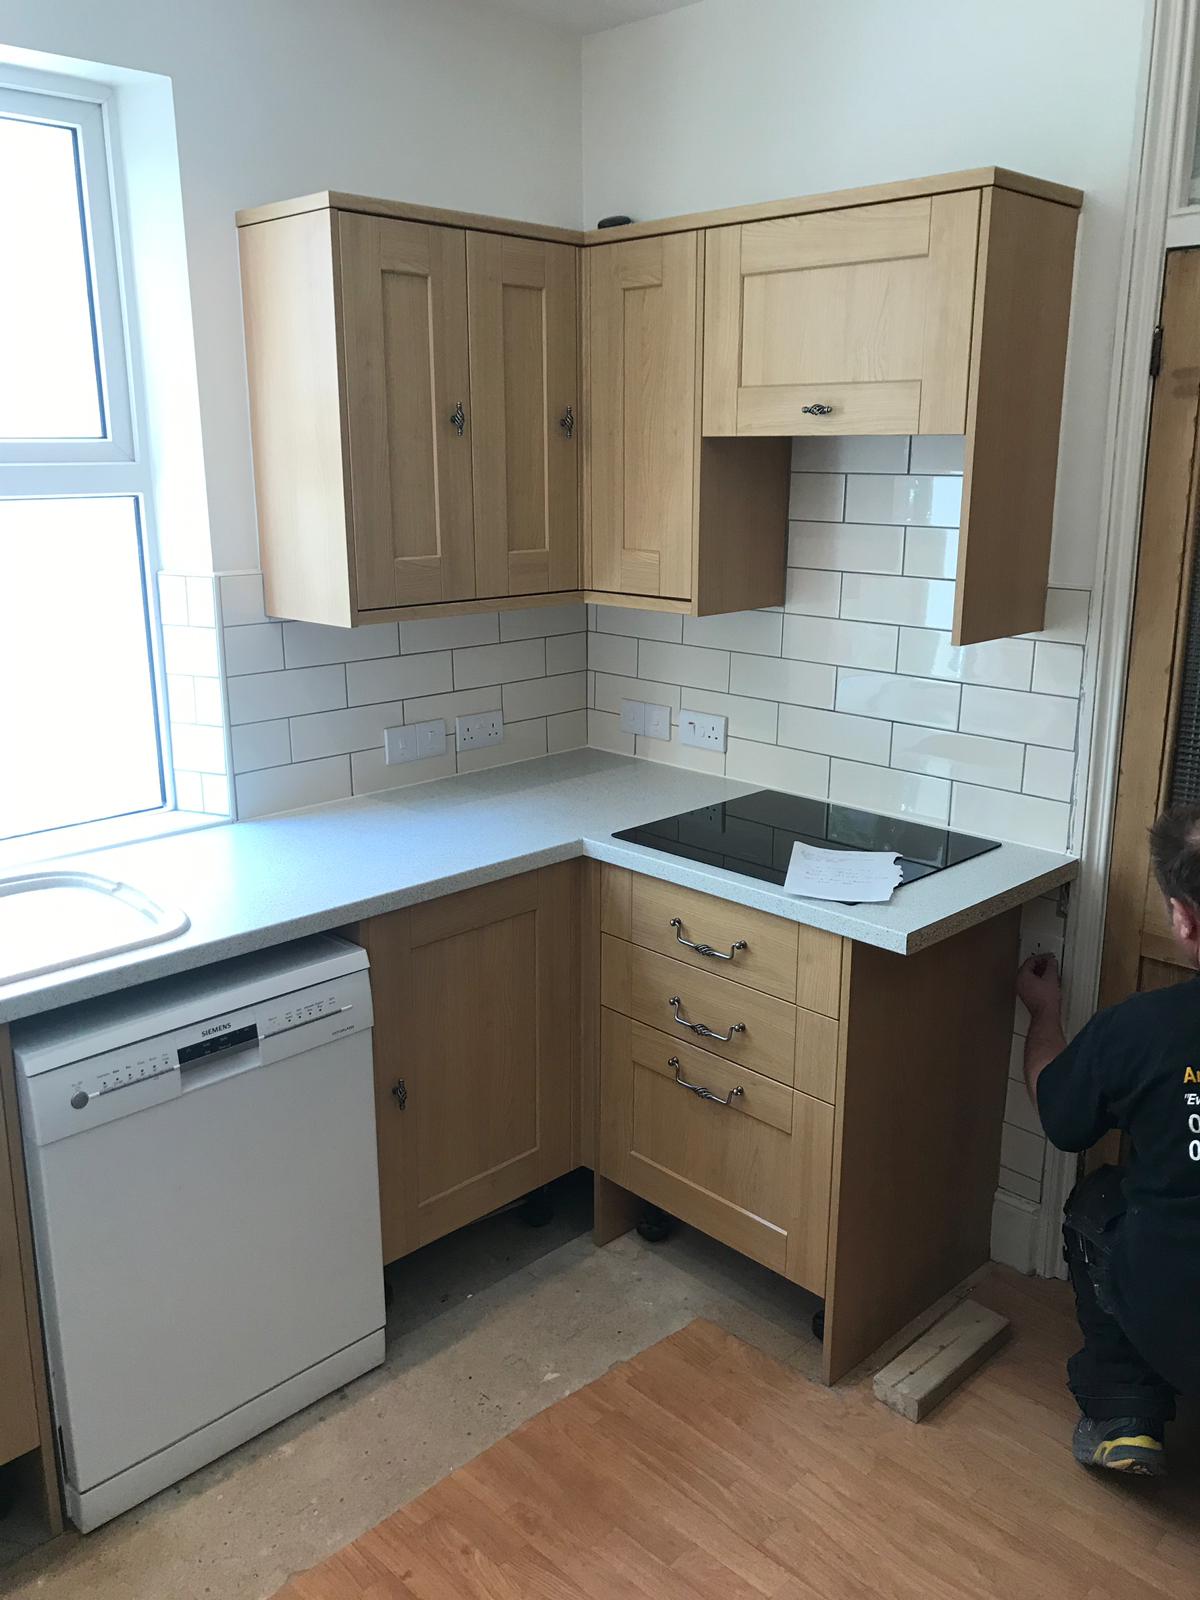 Completed new kitchen build